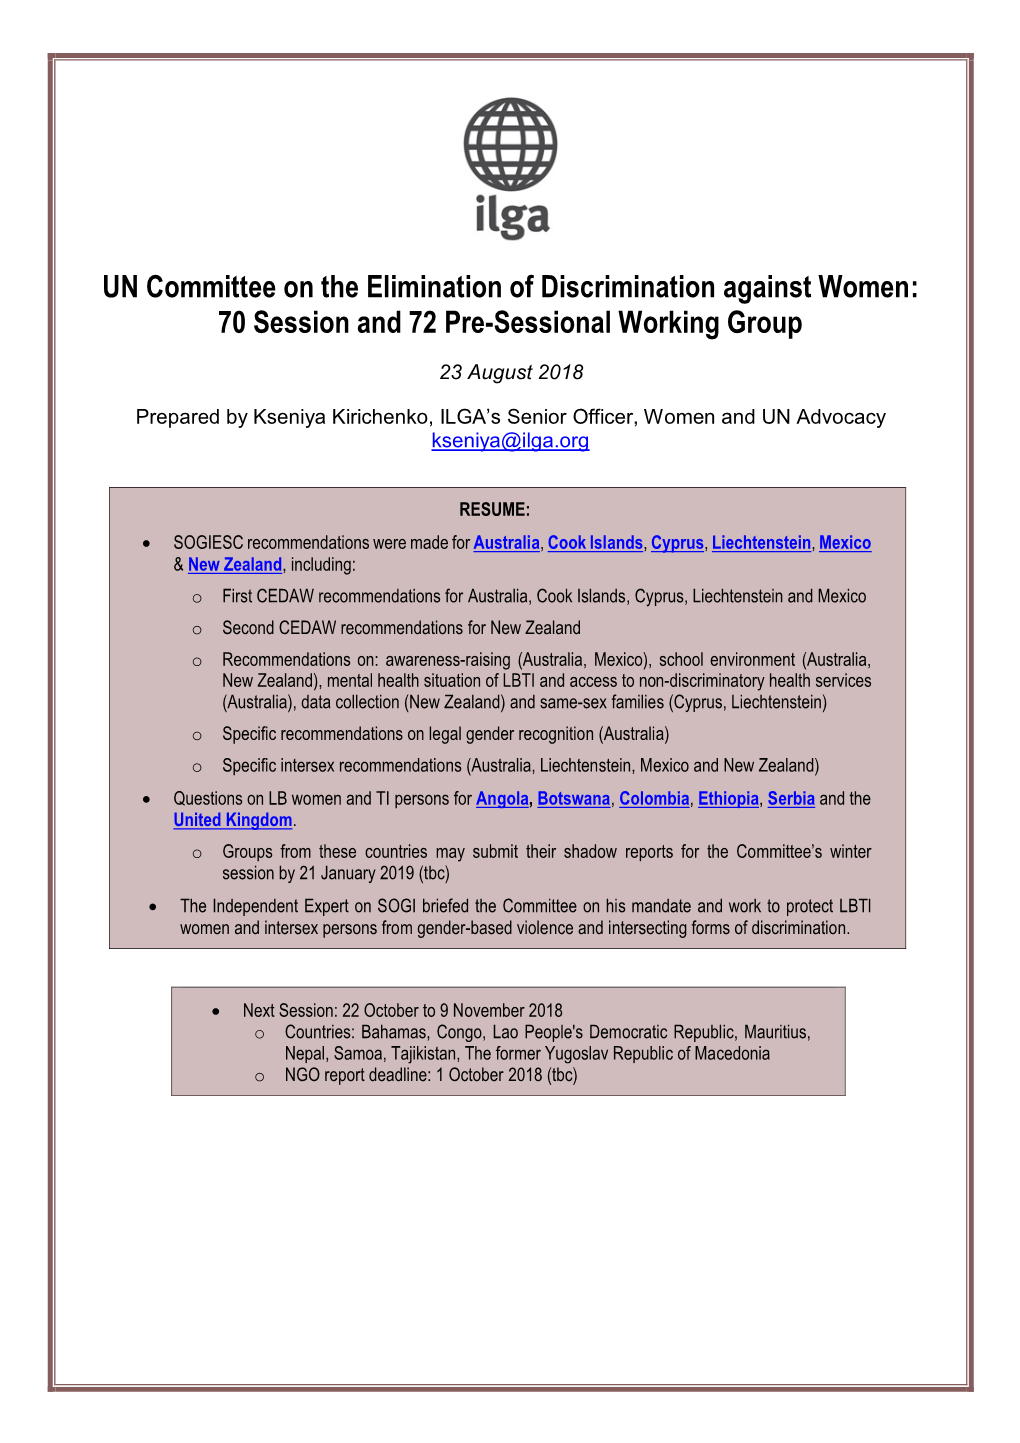 UN Committee on the Elimination of Discrimination Against Women: 70 Session and 72 Pre-Sessional Working Group